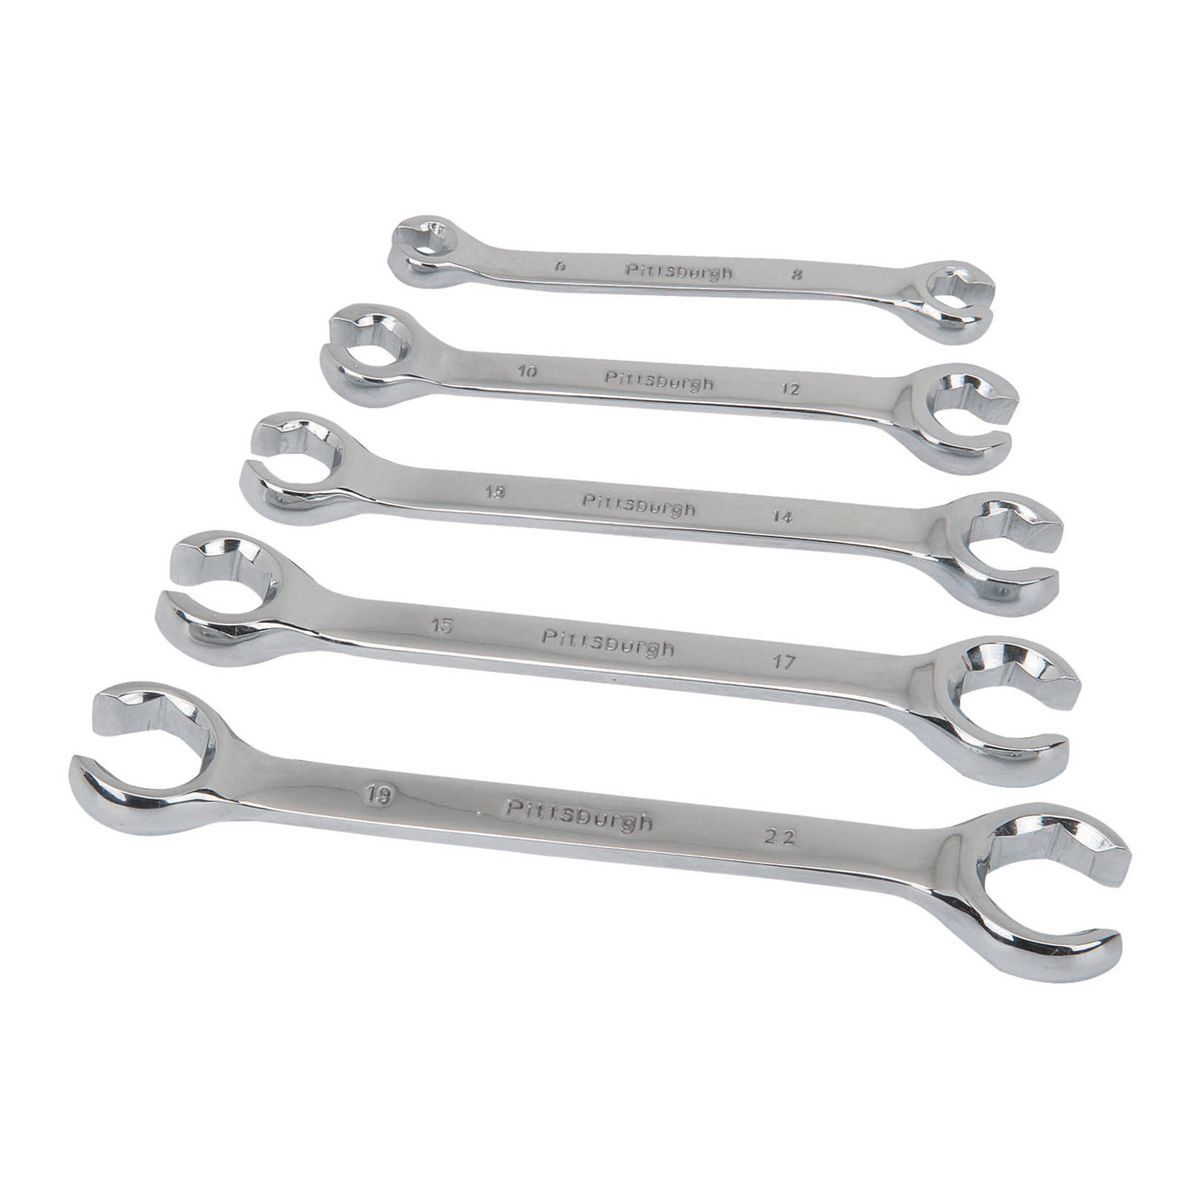 PITTSBURGH Double-End Metric Flare Nut Wrench Set, 5 Piece